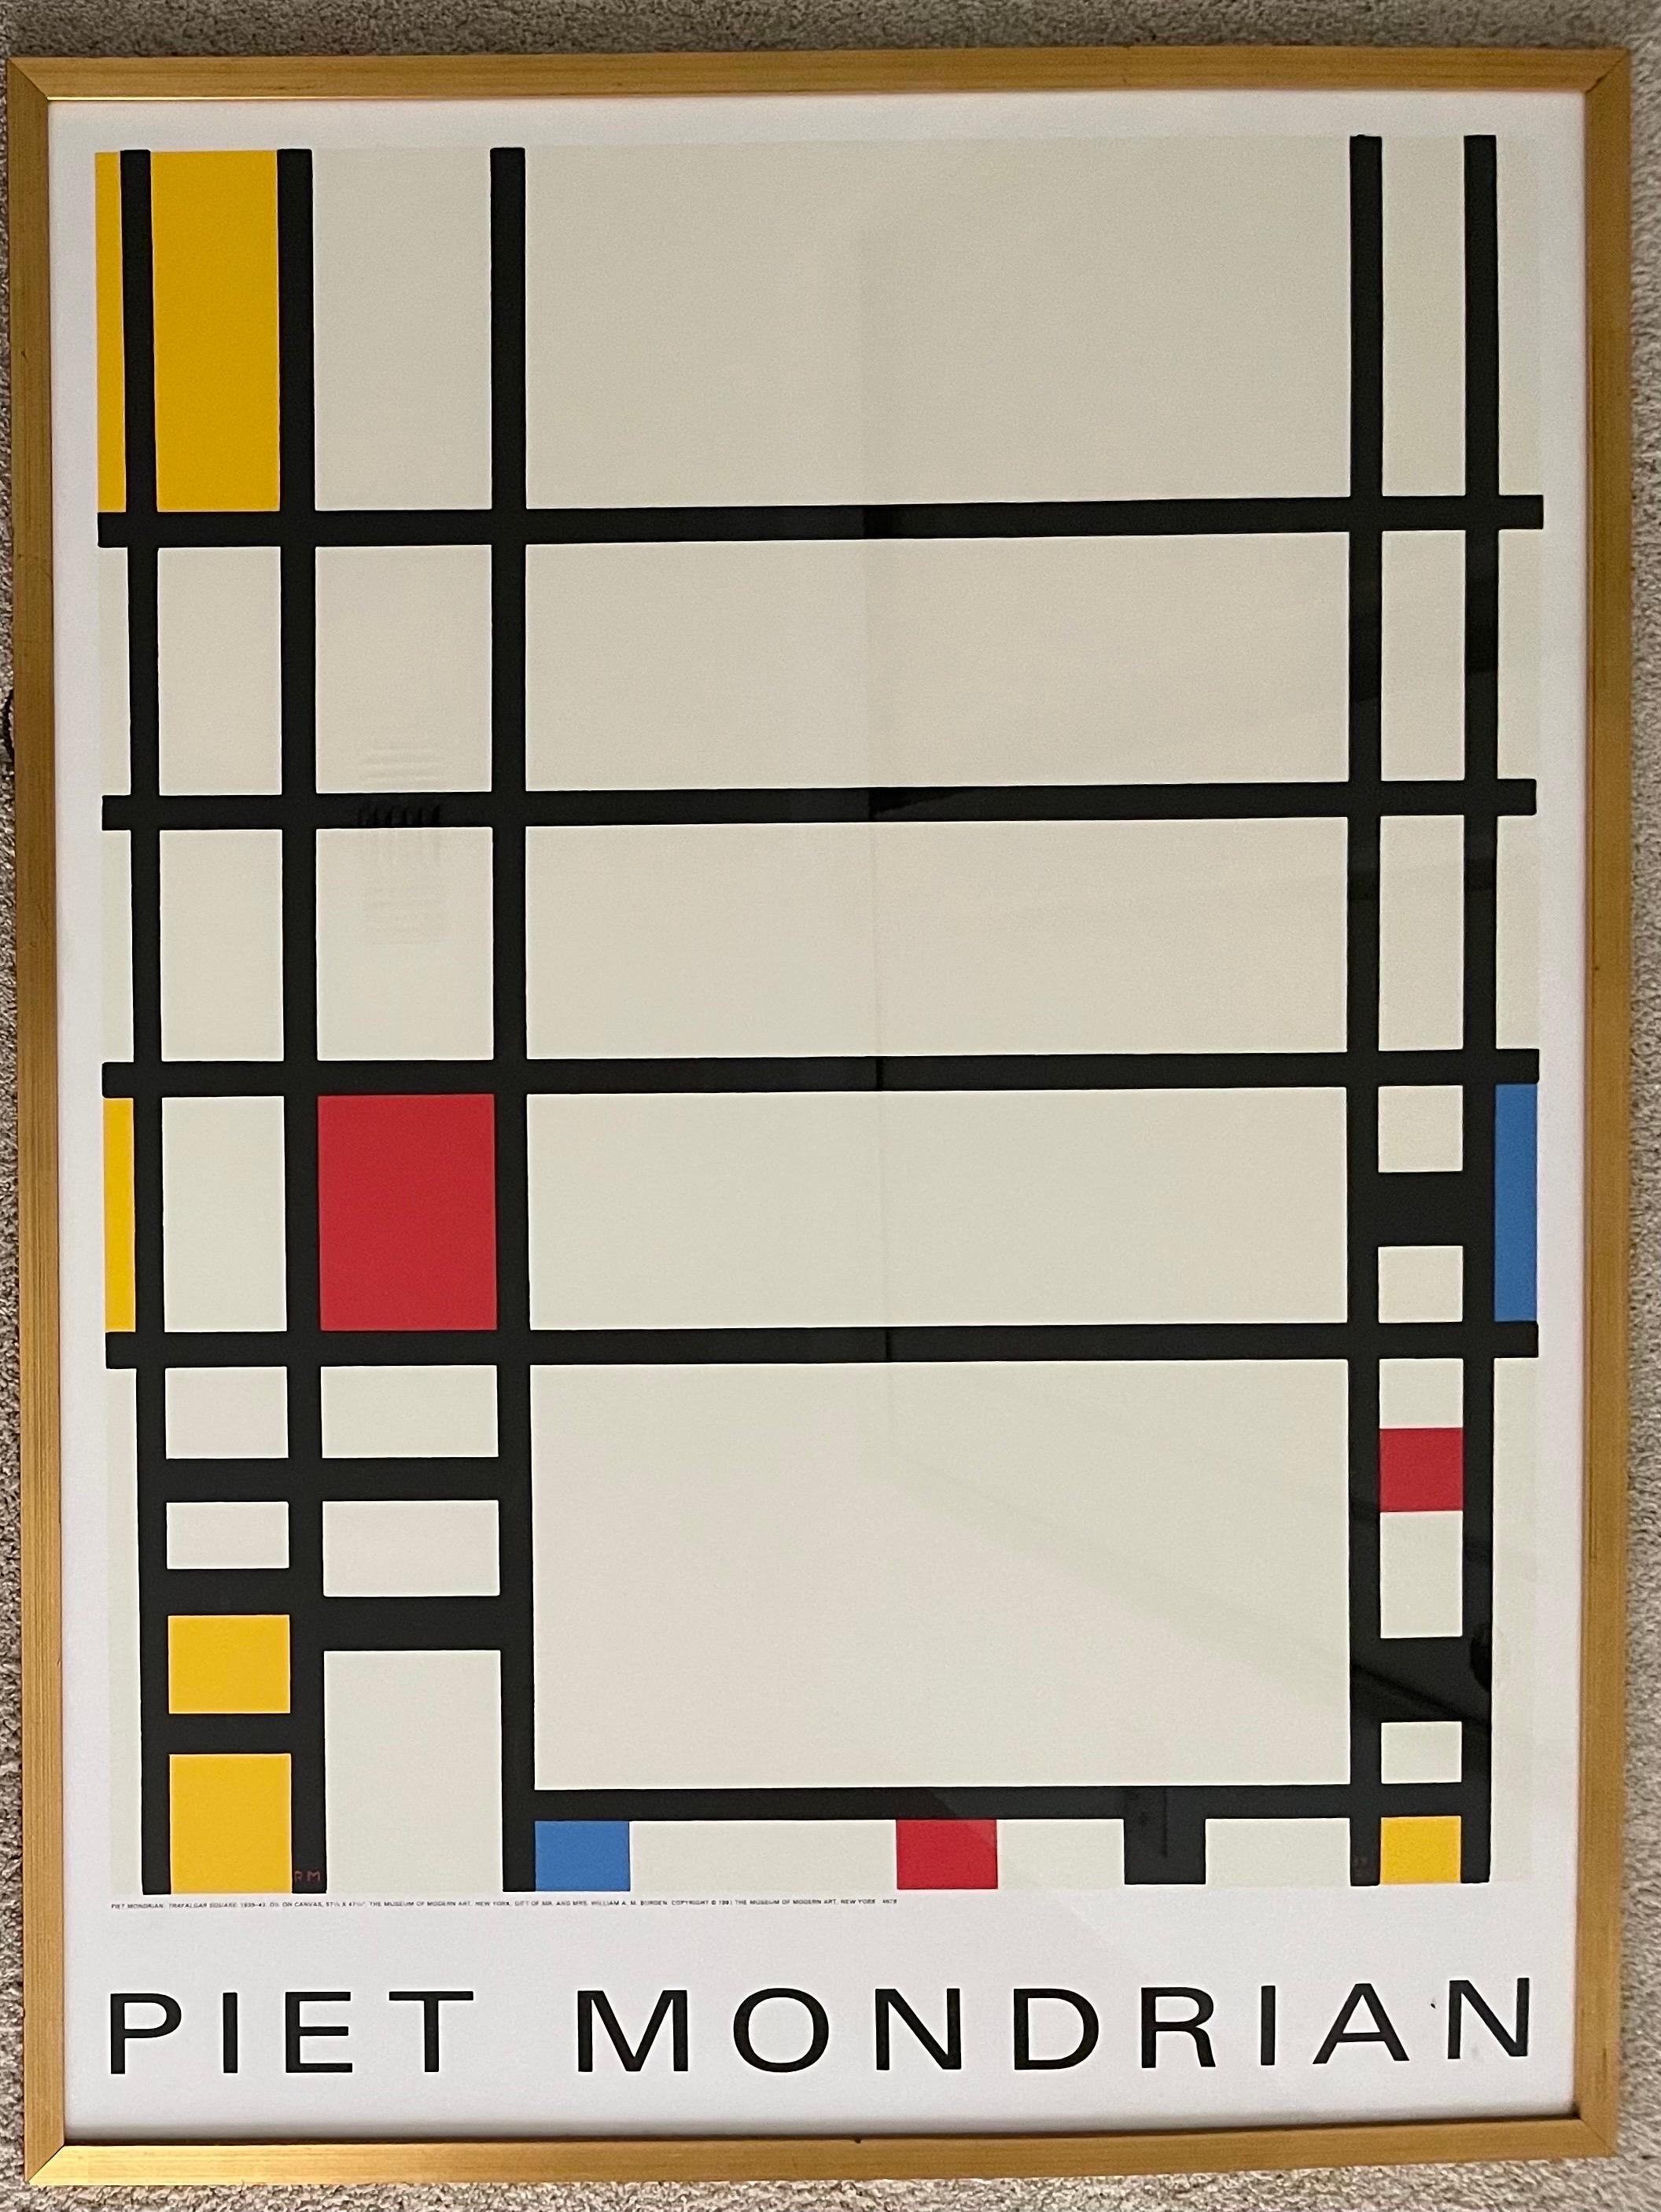 Mid-Century Modern Trafalgar Square Contemporary Lithograph Reproduction by Piet Mondrian For Sale